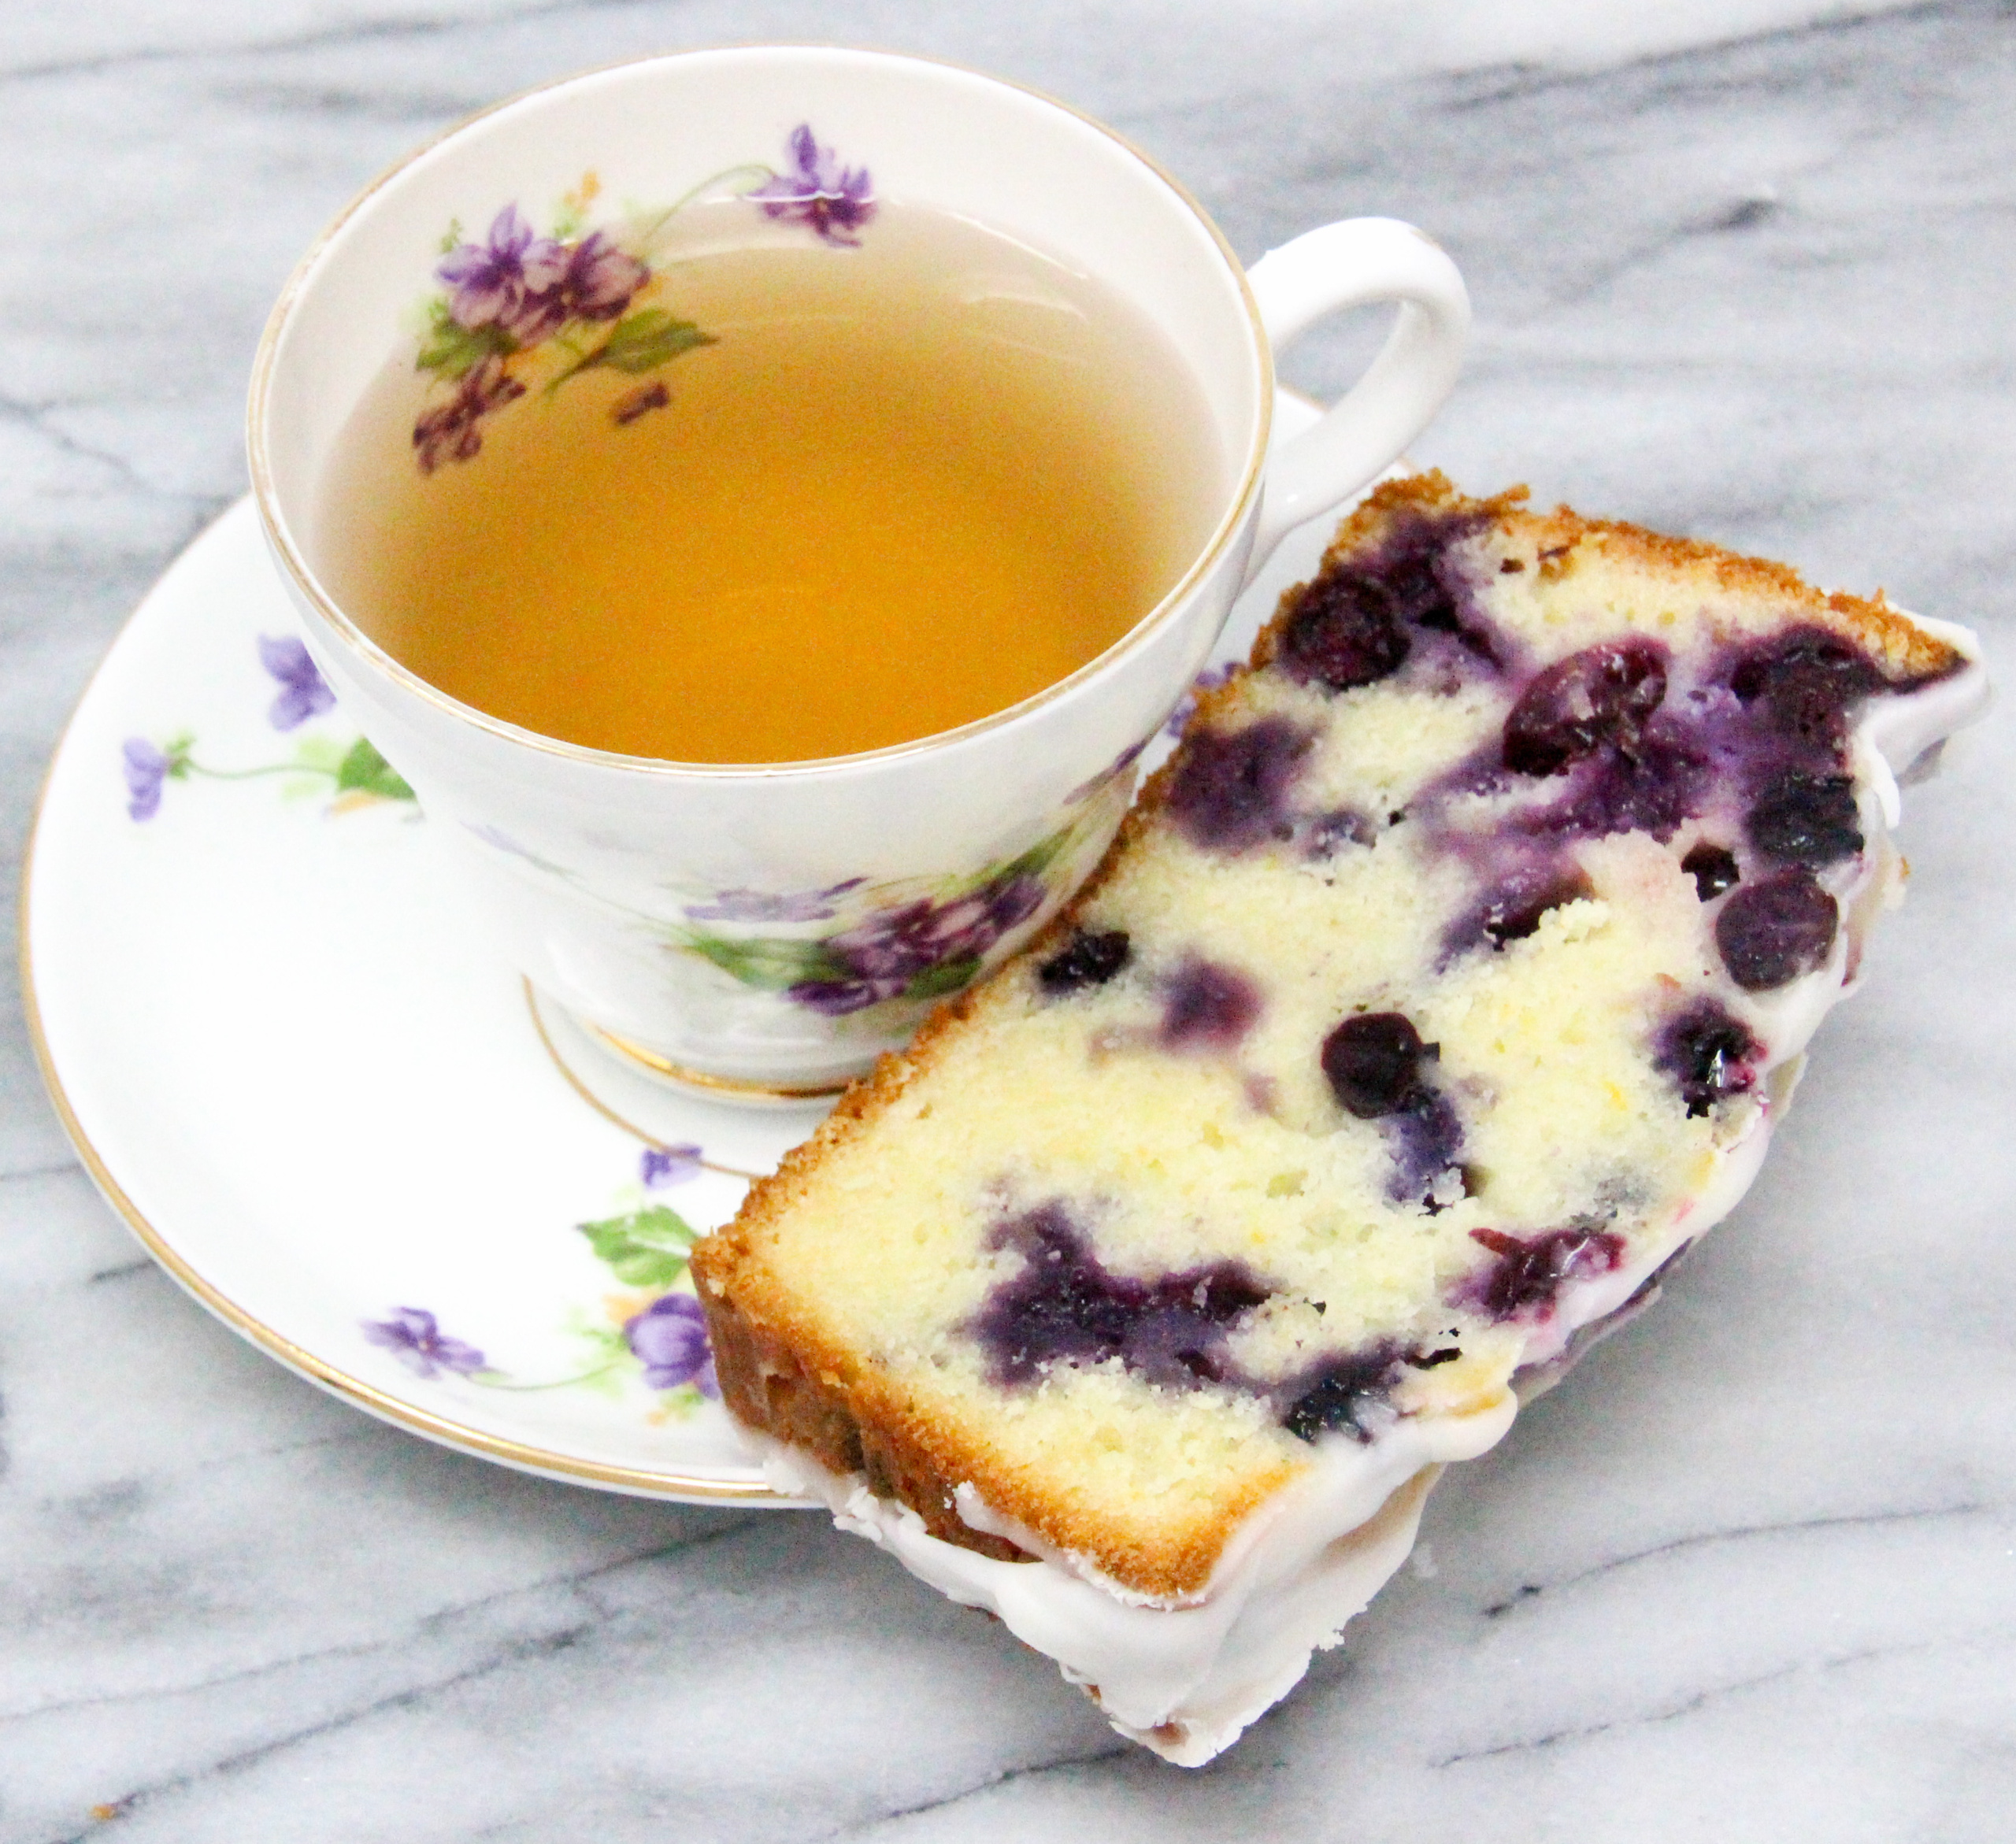 Blueberry Lemon Bread is a delectable tender and moist bread with plump juicy blueberries studded throughout and a sweet-tart lemony glaze. Recipe shared with permission granted by Darci Hannah, author of MURDER AT THE BLUEBERRY FESTIVAL. 